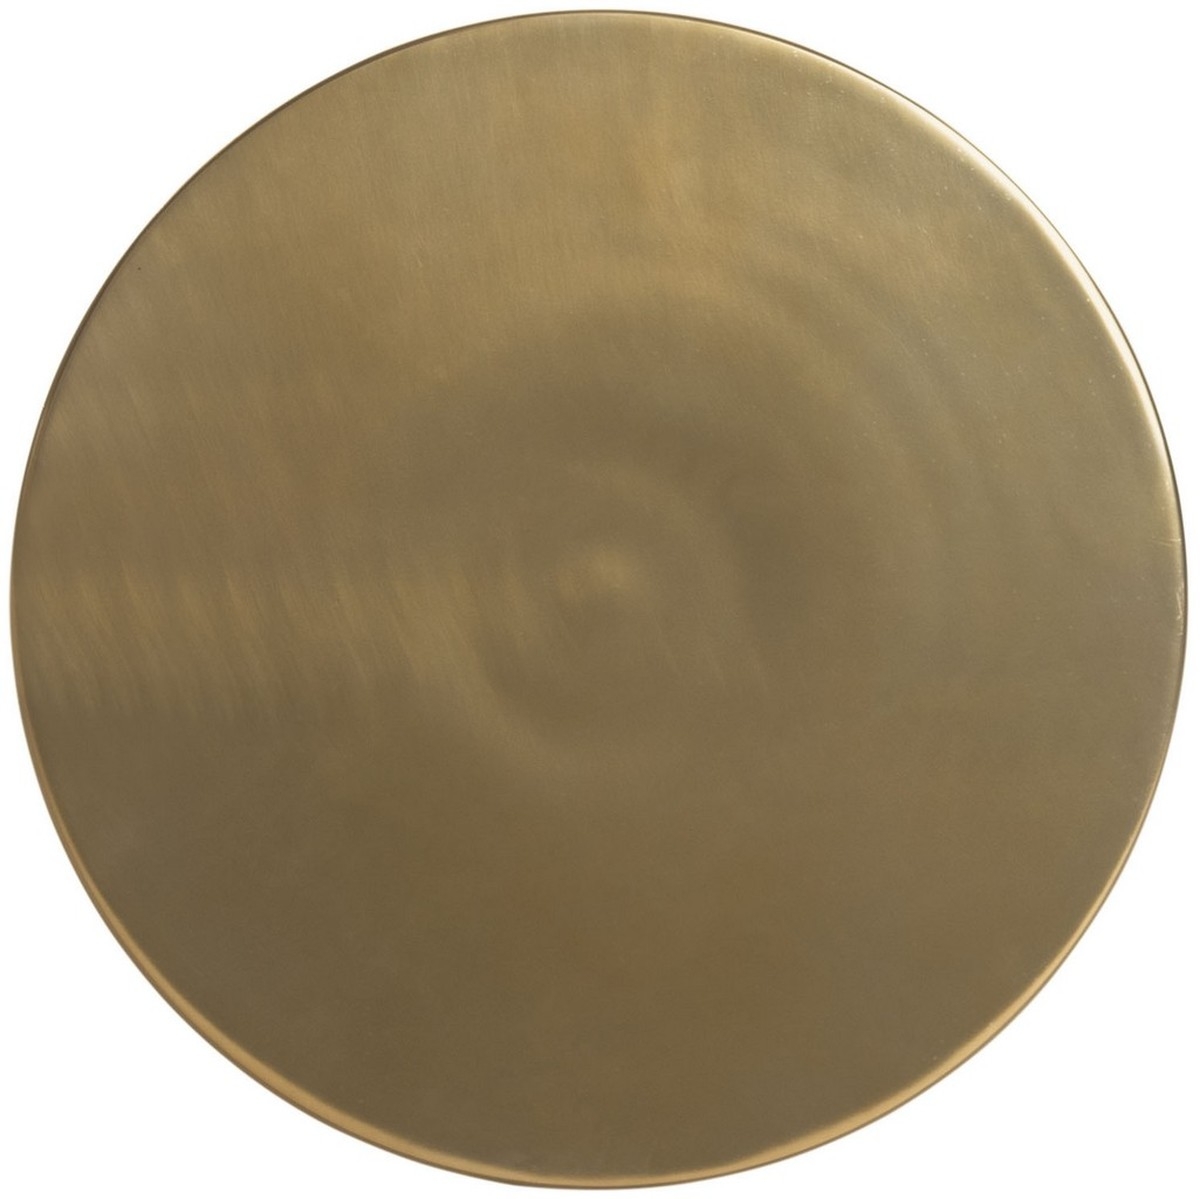 Hydra Round Side Table - Antique Brass - Arlo Home - Image 3